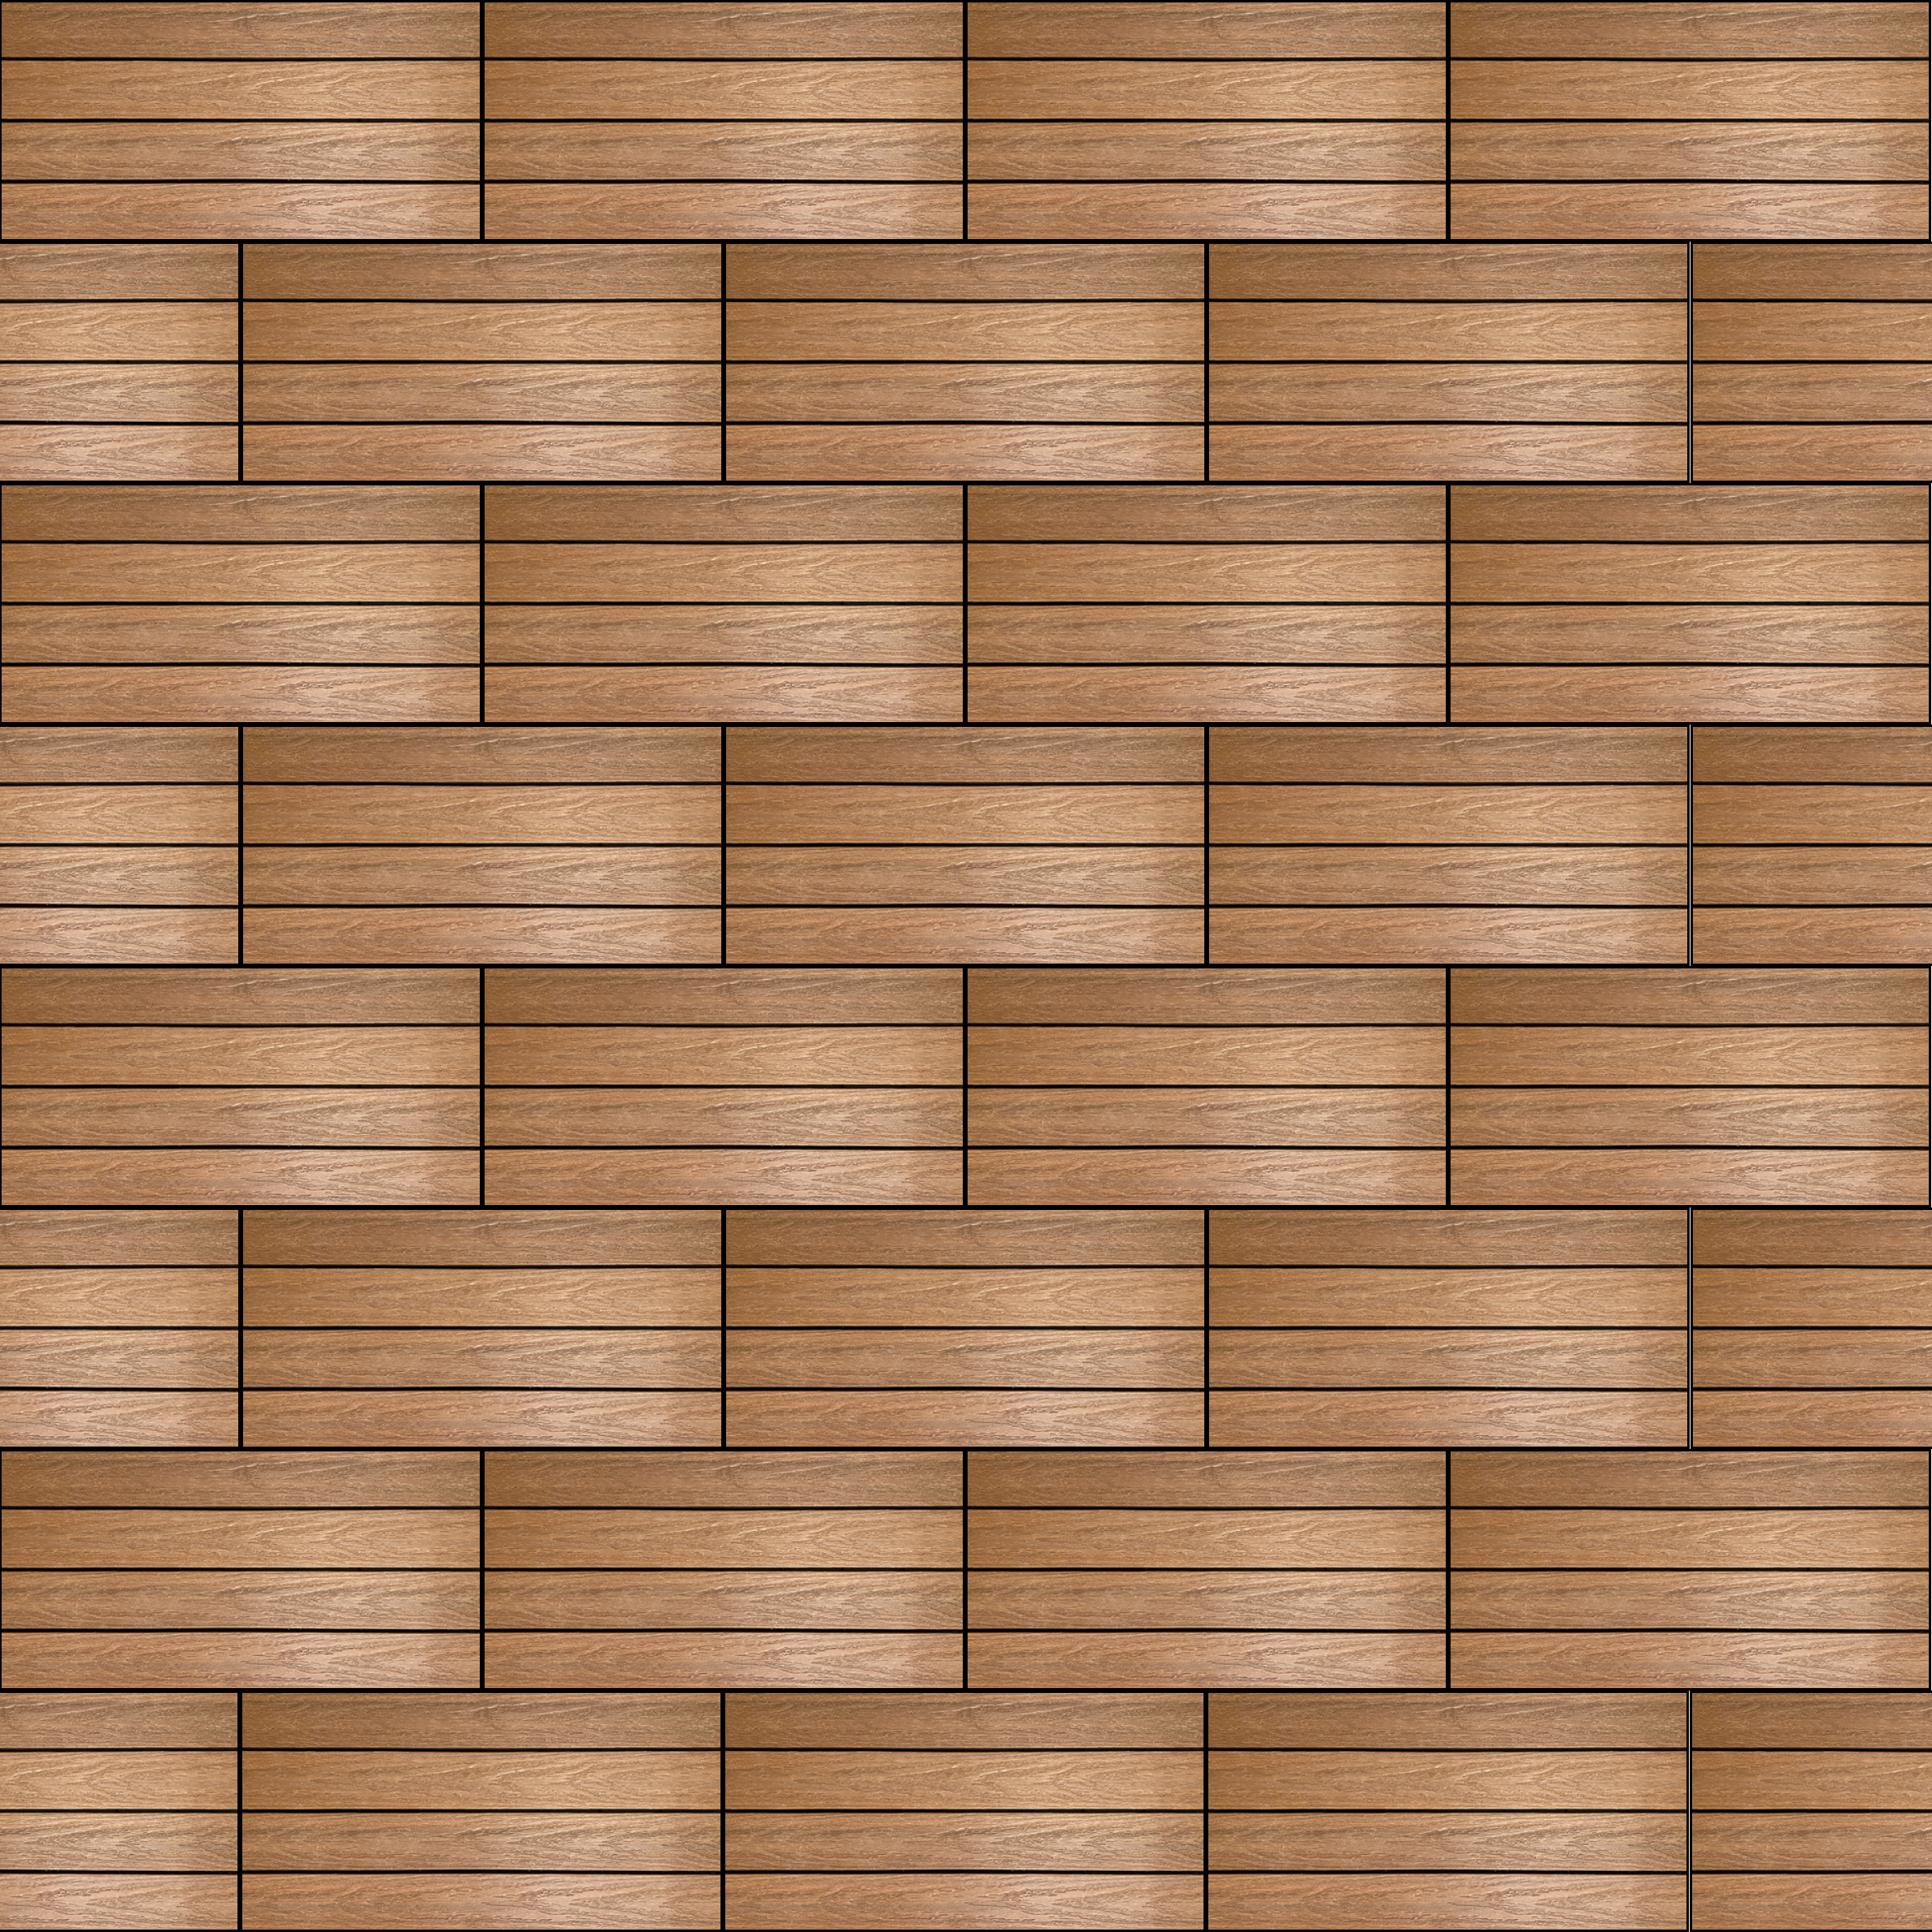 linear staggered floor pattern